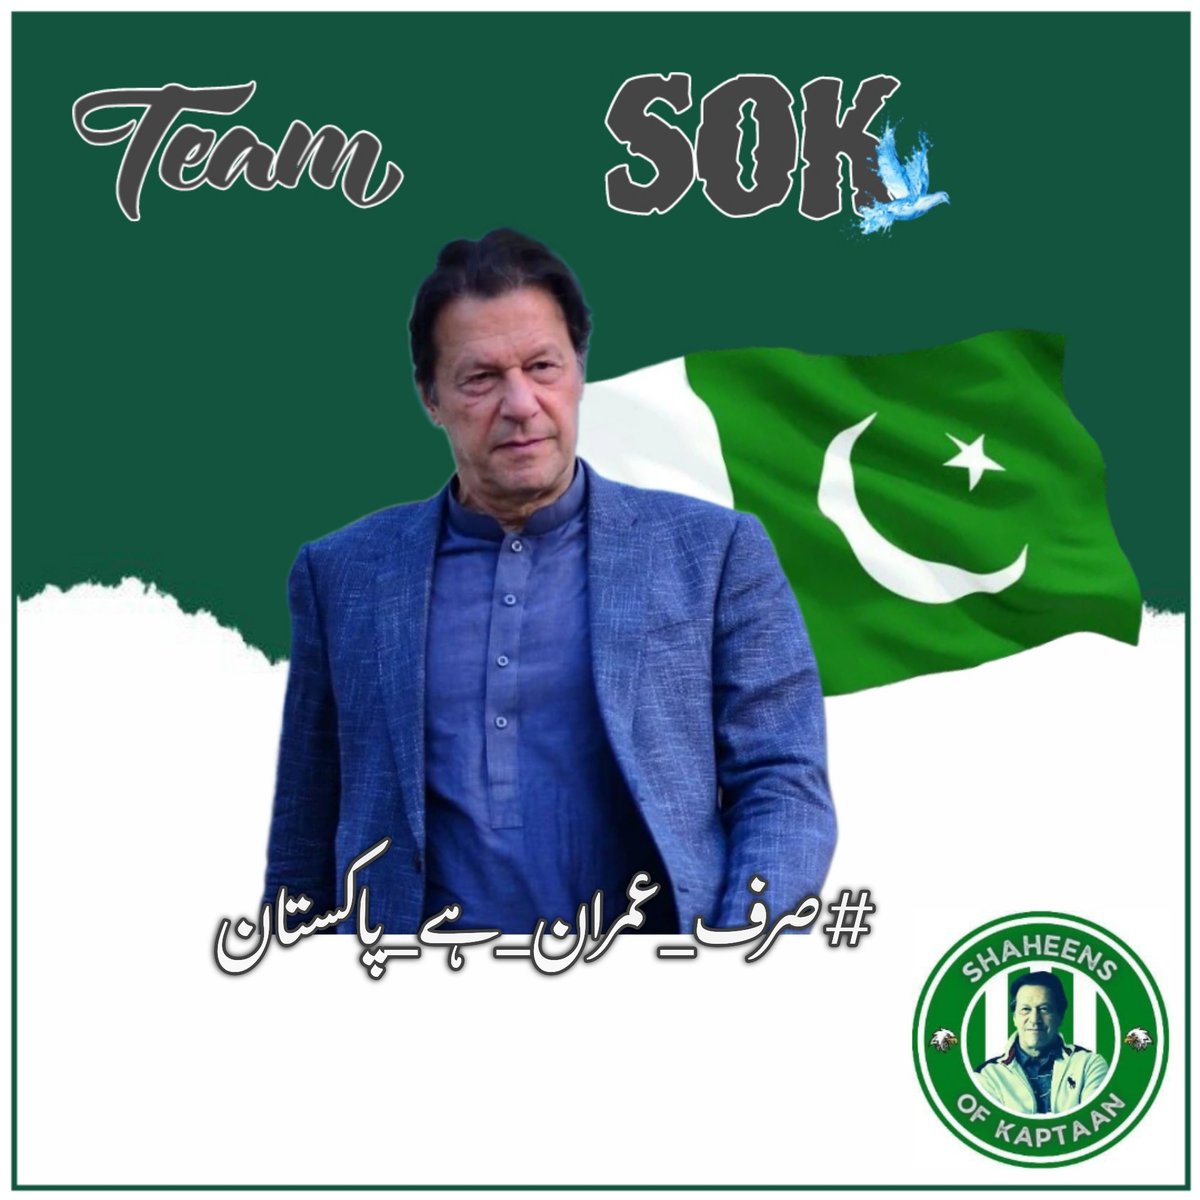 As a national leader, Imran Khan promotes tolerance, diversity, and pluralism, fostering a more inclusive society.'
@TeamS0K
#صرف_عمران_ہے_پاکستان